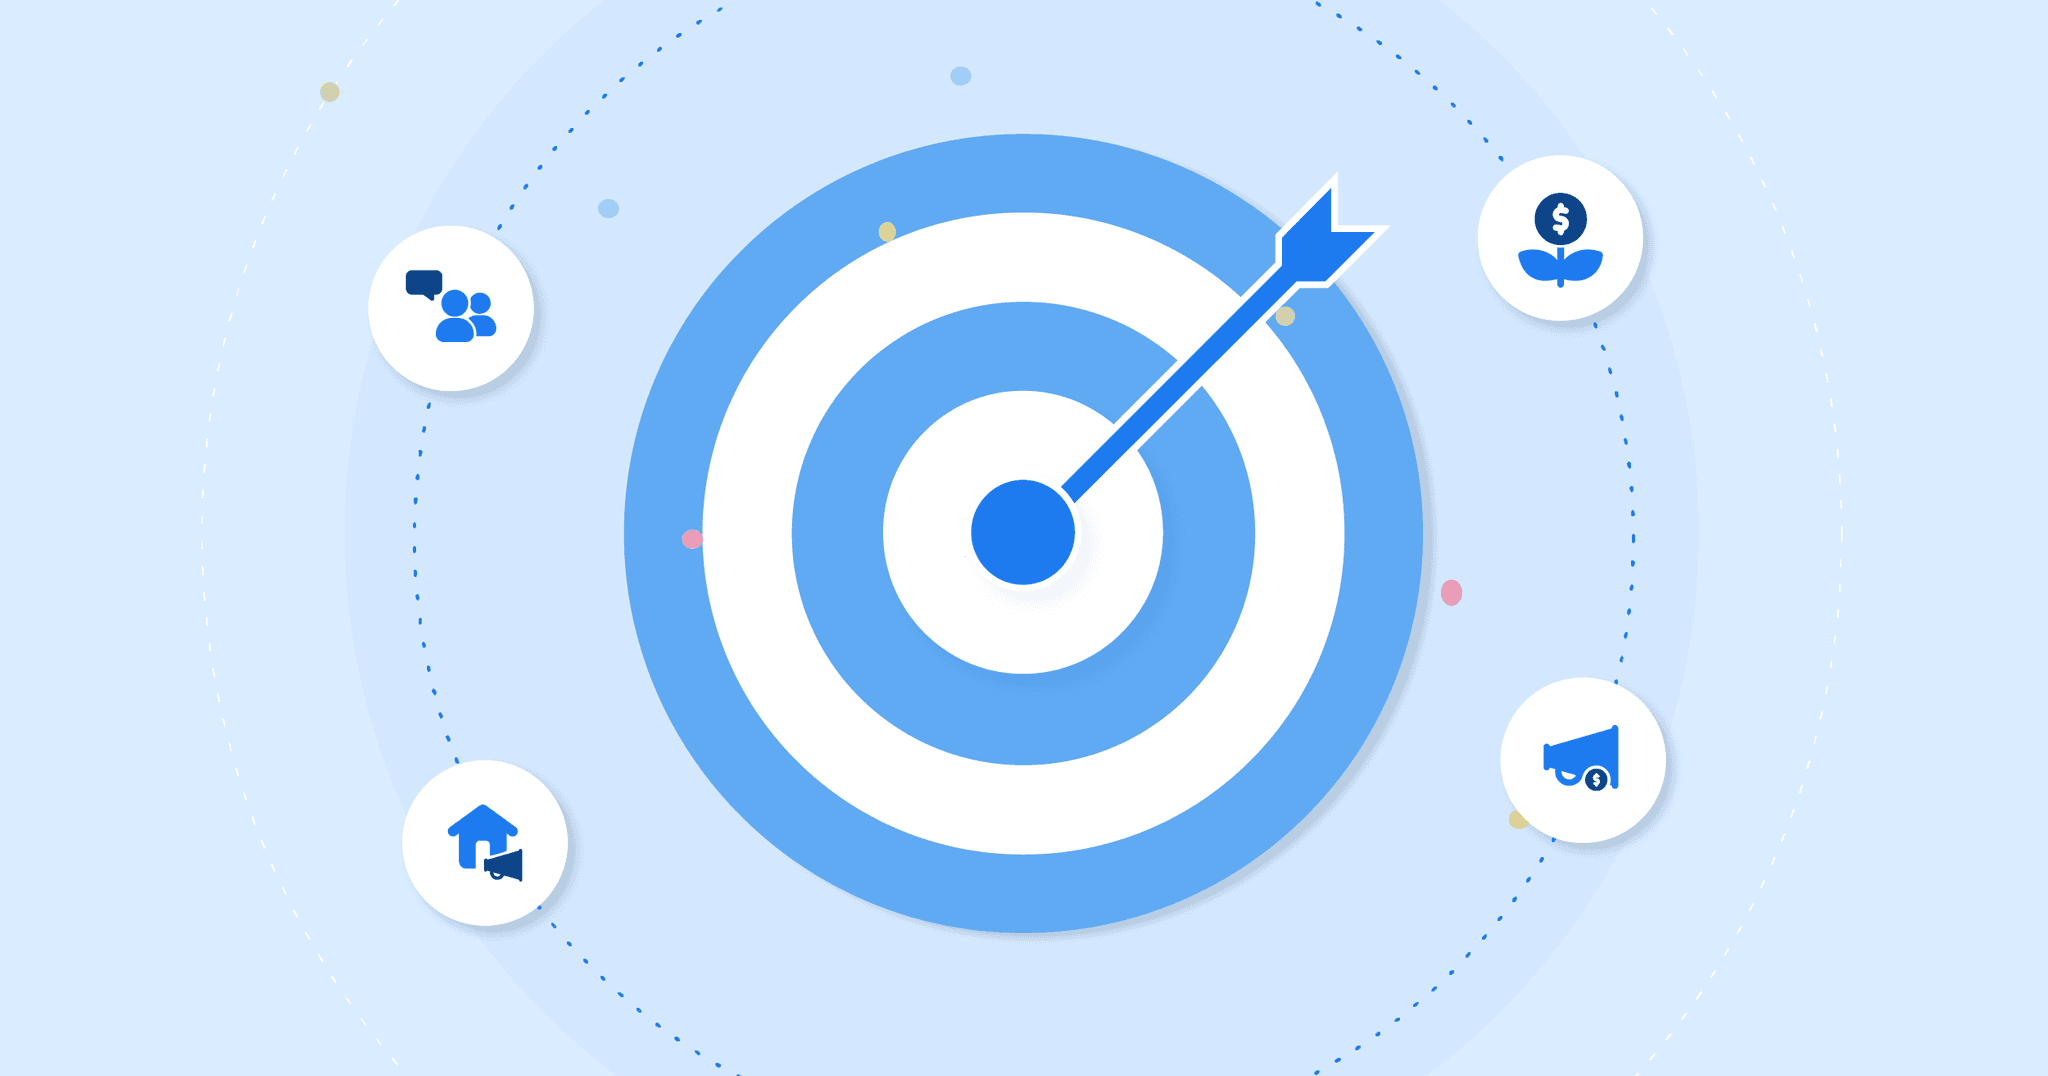 hero image of the paid earned shared and owned (PESO) model with an arrow in the center of a target